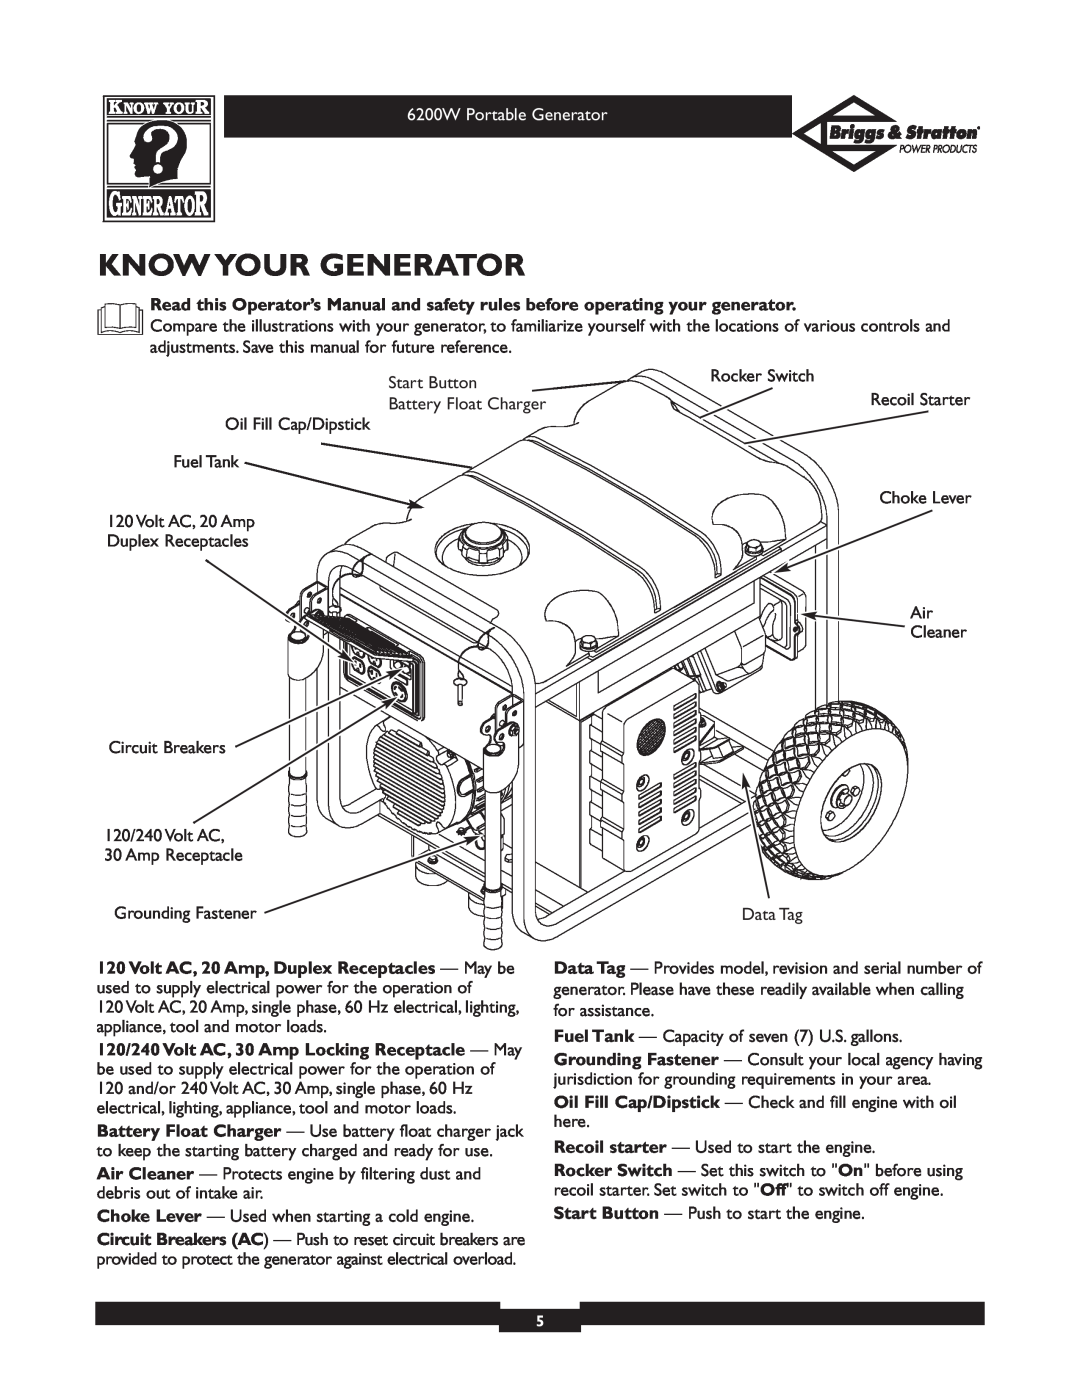 Briggs & Stratton 30211 operating instructions Know Your Generator, 6200W Portable Generator 